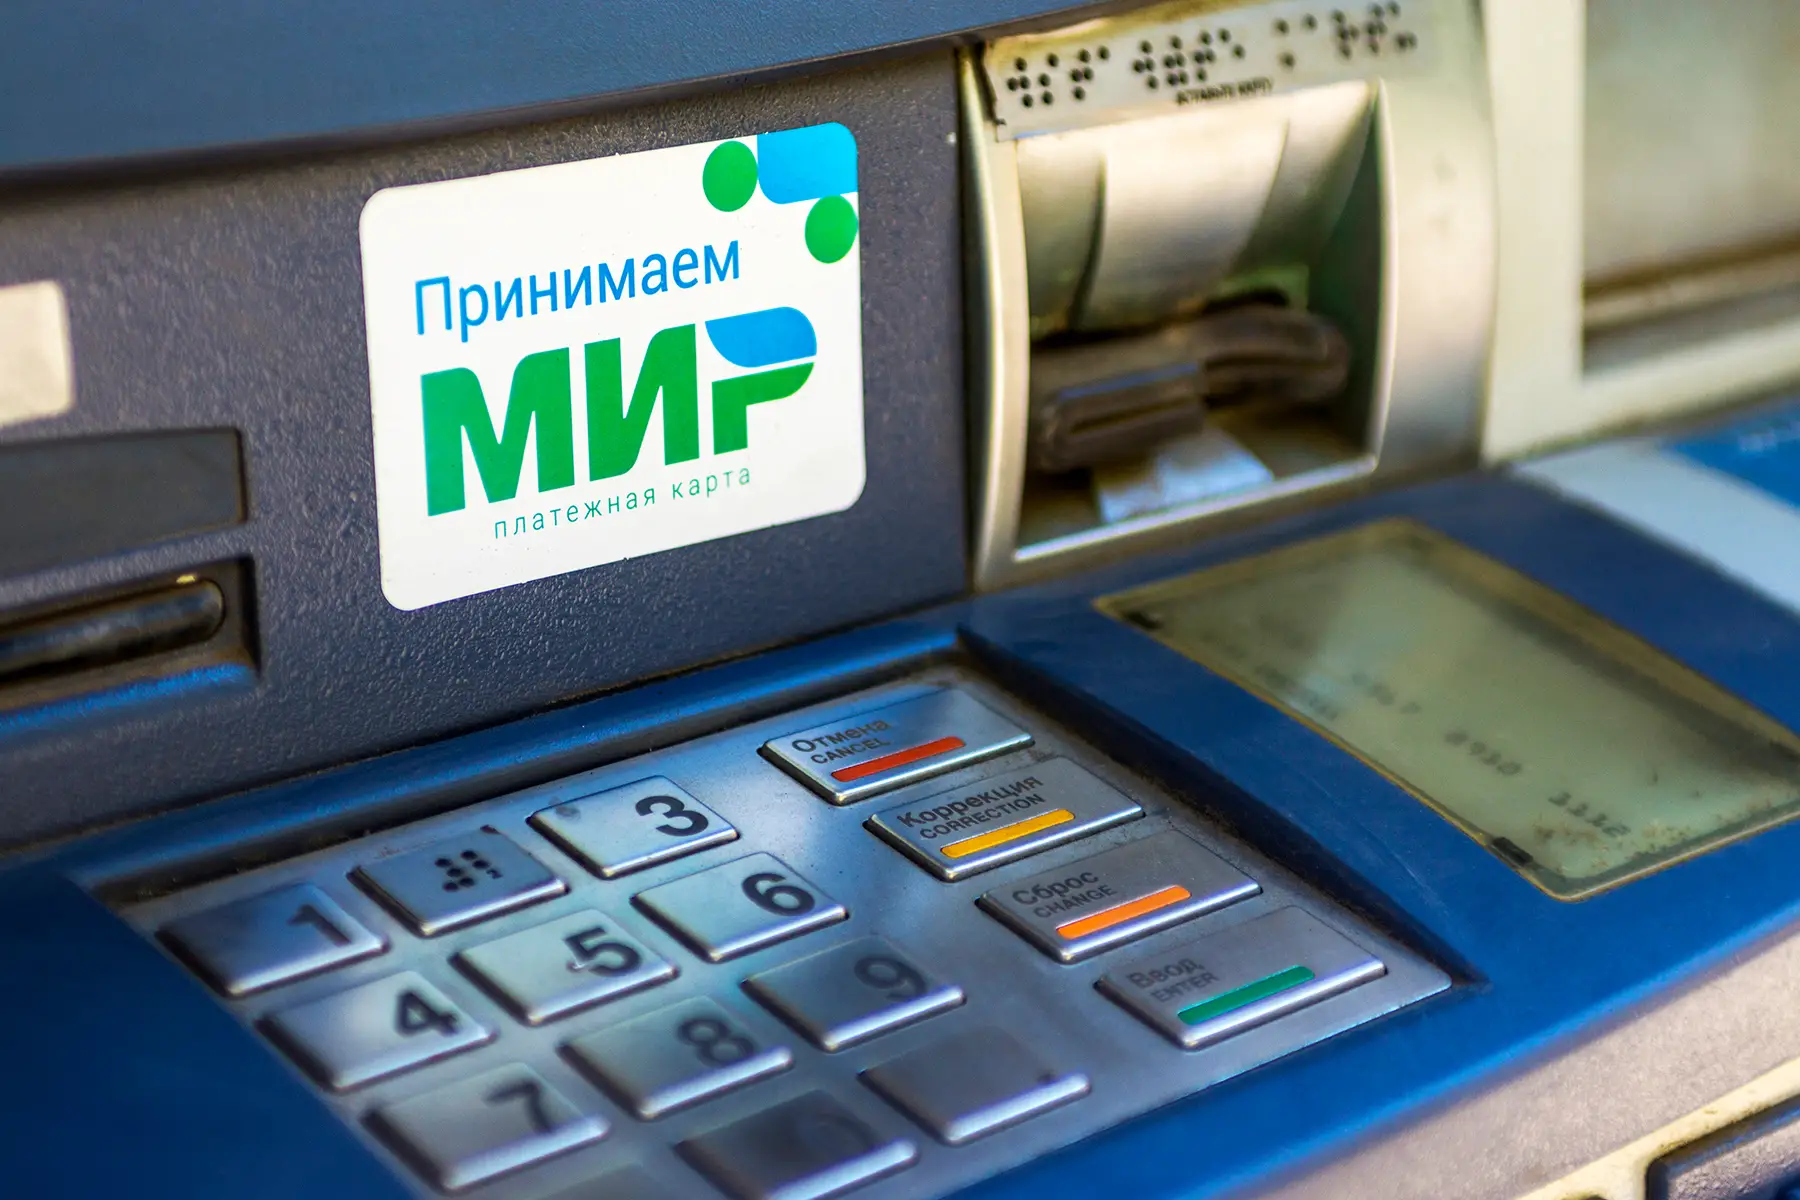 Sign for the Mir payment system on an ATM in Russia